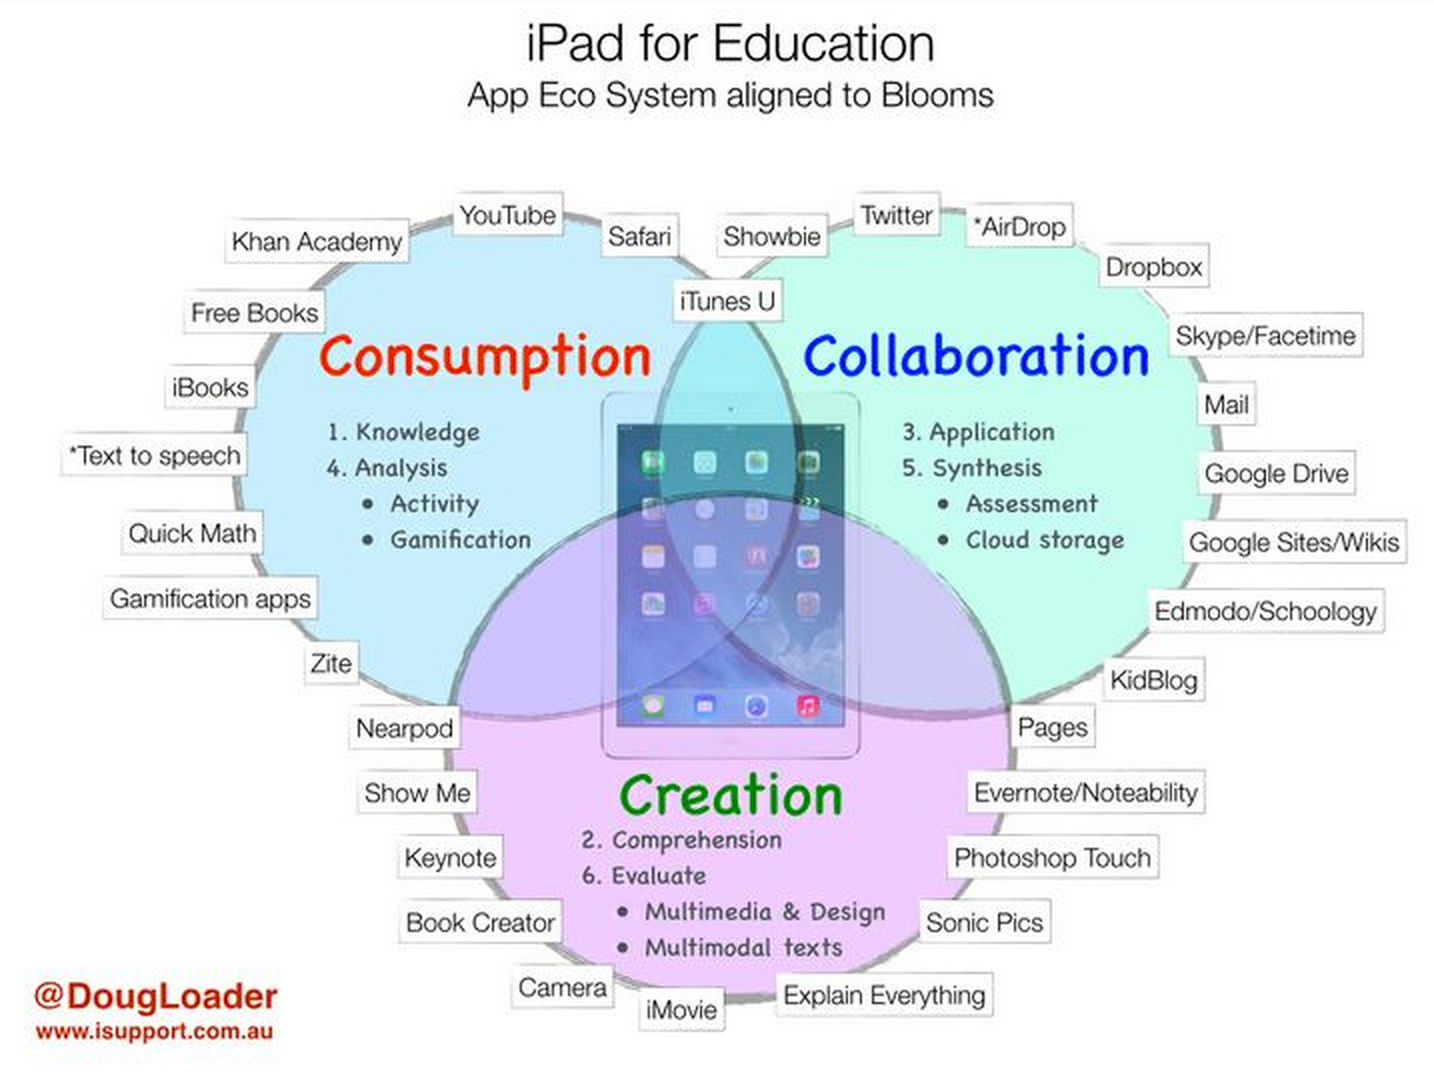 iPad Apps Aligned with Bloom's Taxonomy and SMAR Model